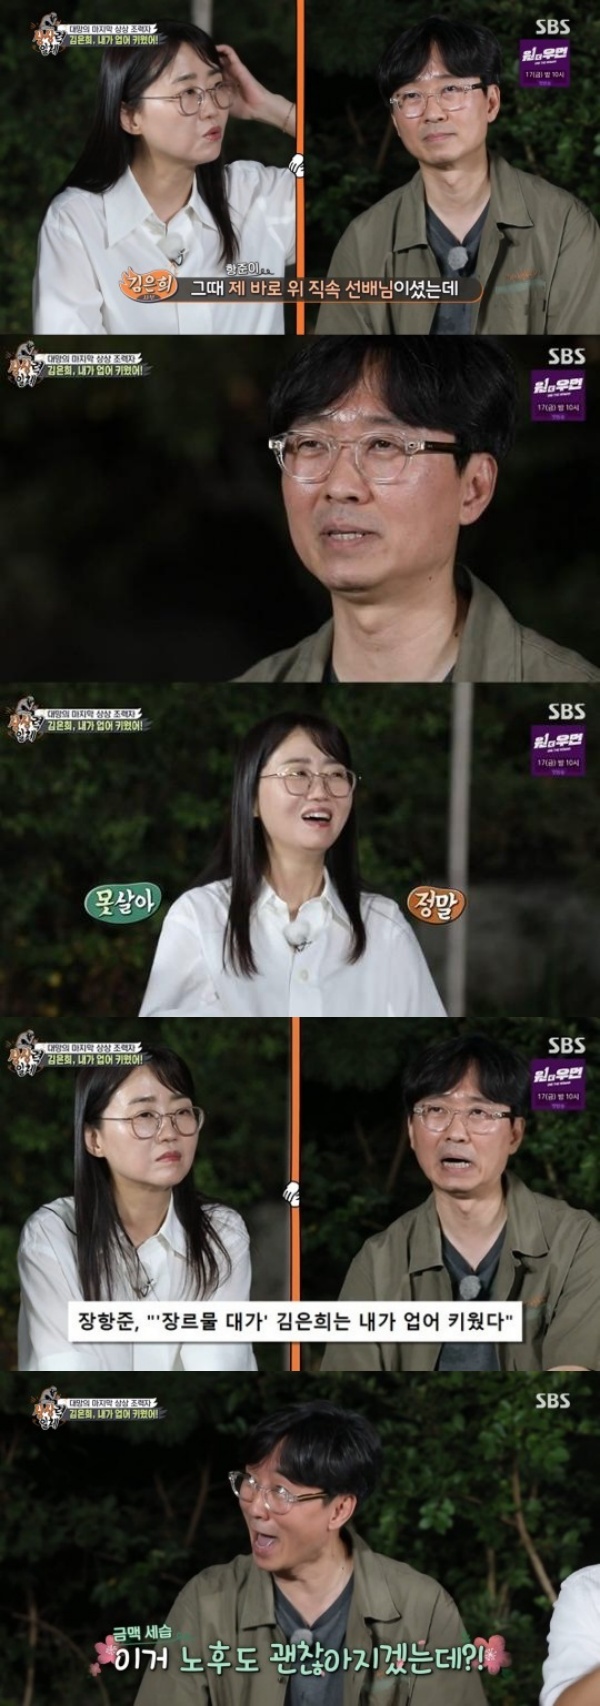 Jang Hang-jun said he raised his wife Kim Eun-hee.On SBS All The Butlers broadcast on the 12th, Kim Eun-hee was sent as a master and showed off couple chemistry with director Jang Hang-jun.The members who became the daily writer team of Kim Eun-hee wrote the traditional fairy tale as a genre.The members were passionate about meeting the assistants of Kim Eun-hee and covering them.The passion was constant at the Synopsys meetings of each team that followed: both teams burned their enthusiasm to the ida, which was pouring like a waterfall, and devoted themselves to the creation of Synopsys.In particular, Jeon Seok-ho, a daily student, immersed in the role of Synopsys, exploding explosive acting skills and making the scene laugh.Later, Synopsys presentation time, Kim Eun-hees assistant, Sam In-bang, became a judge to fairly evaluate the Synopsys of the members.Ha Hong-il, the prosecutor Seo In-sun, and Jang Hang-jun continued their detailed examination by utilizing their own expertise.In particular, director Jang Hang-jun and Kim Eun-hee presented the direction of the members Synopsys and gave an idea.Kim Eun-hee introduced Husband Jang Hang-jun as the first shooter of my life and that Jang Hang-jun, who was a direct senior, informed me about the scenario.Jang Hang-jun said, I told you about politics, economy, culture, and the world besides society.I think the word I raised Kim Eun-hee is absurd and I dont think it contributed to that.Jang Hang-jun also stressed that Kim Eun-hees hit Kingdom was also a vampire in the Joseon Dynasty, but Kim Eun-hee wrote a fine head.She also boasted that she was good at writing.Jang Hang-jun said, In my daughters case, I never asked her to read a book or write, but I started writing novel from the second grade of elementary school.I was thinking, Oh, if you do this well, Norroy-le-Veneur will be fine, too, he said.